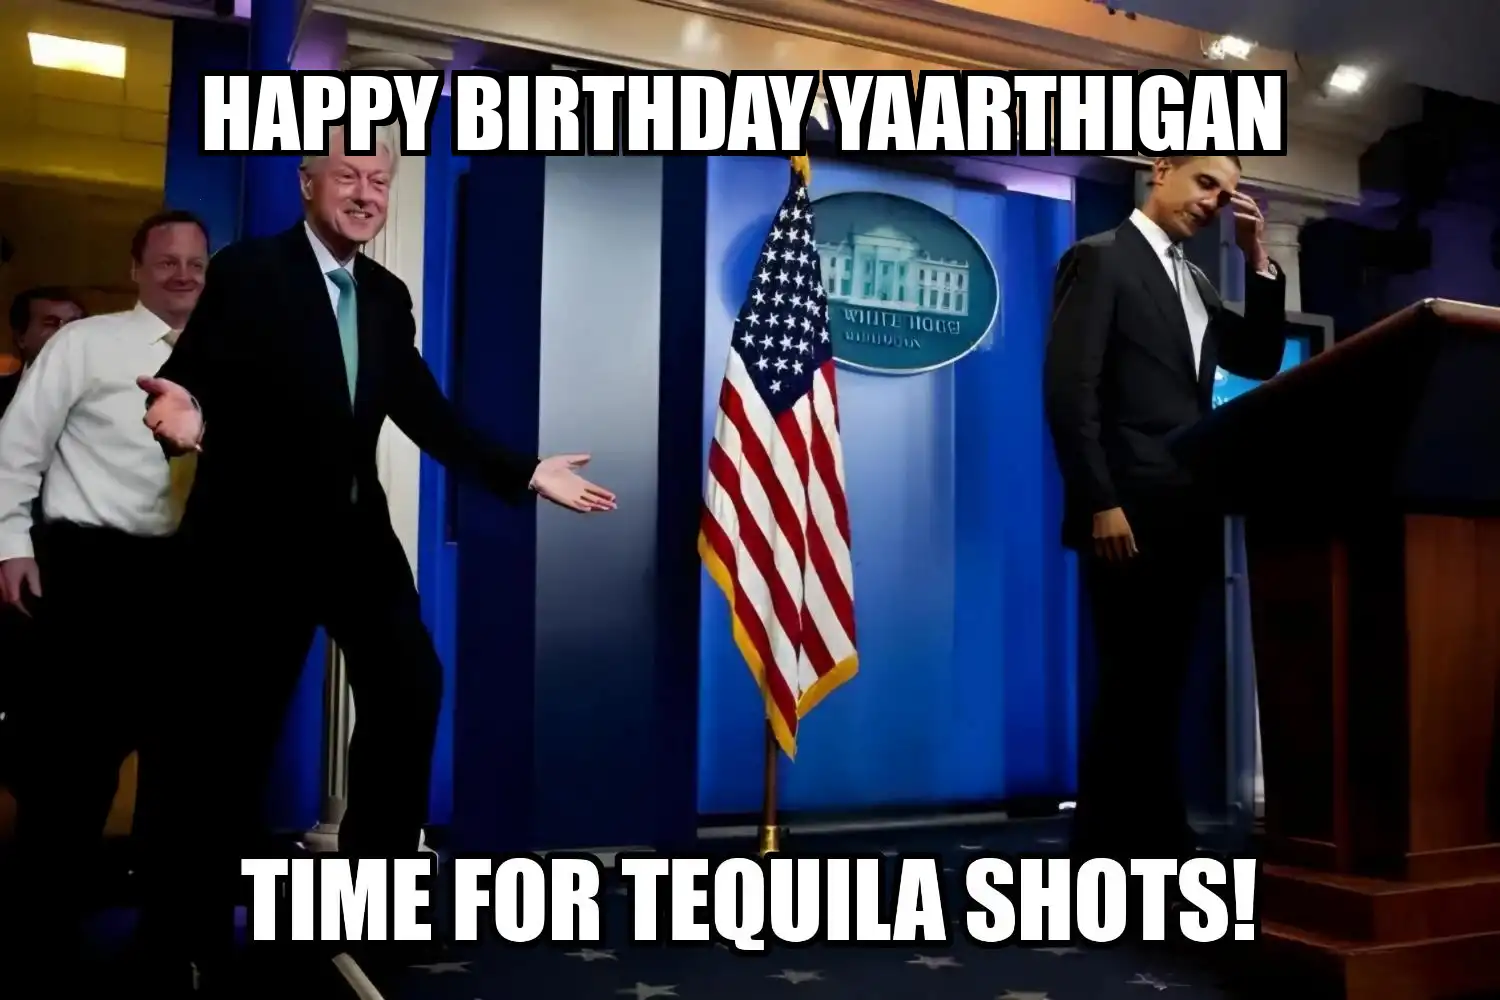 Happy Birthday Yaarthigan Time For Tequila Shots Memes